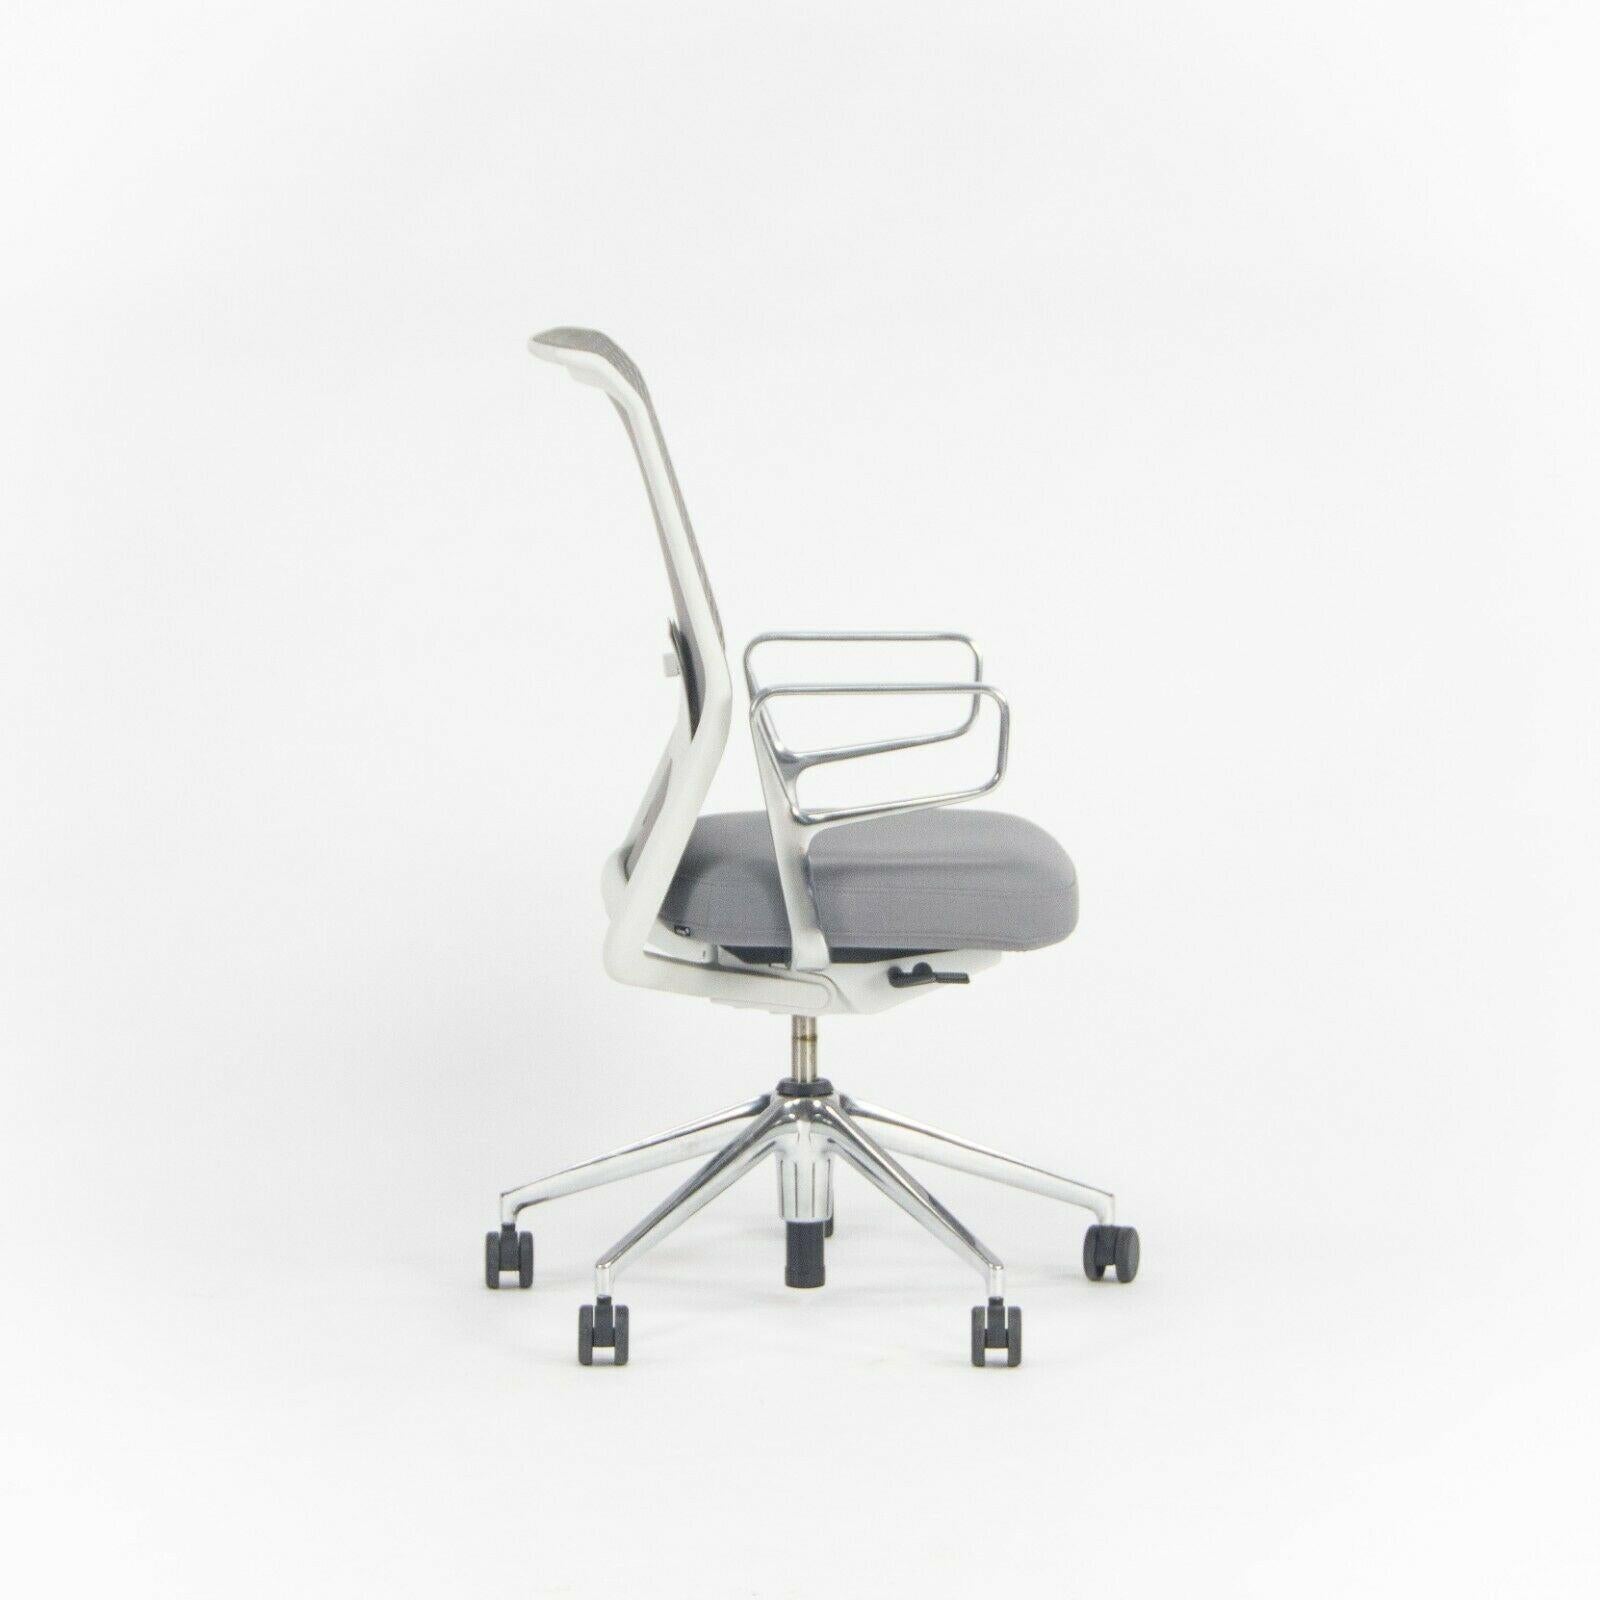 Swiss 2015 Gray Vitra ID Mesh Desk Chairs by Antonio Citterio Polished Arms / Bases For Sale